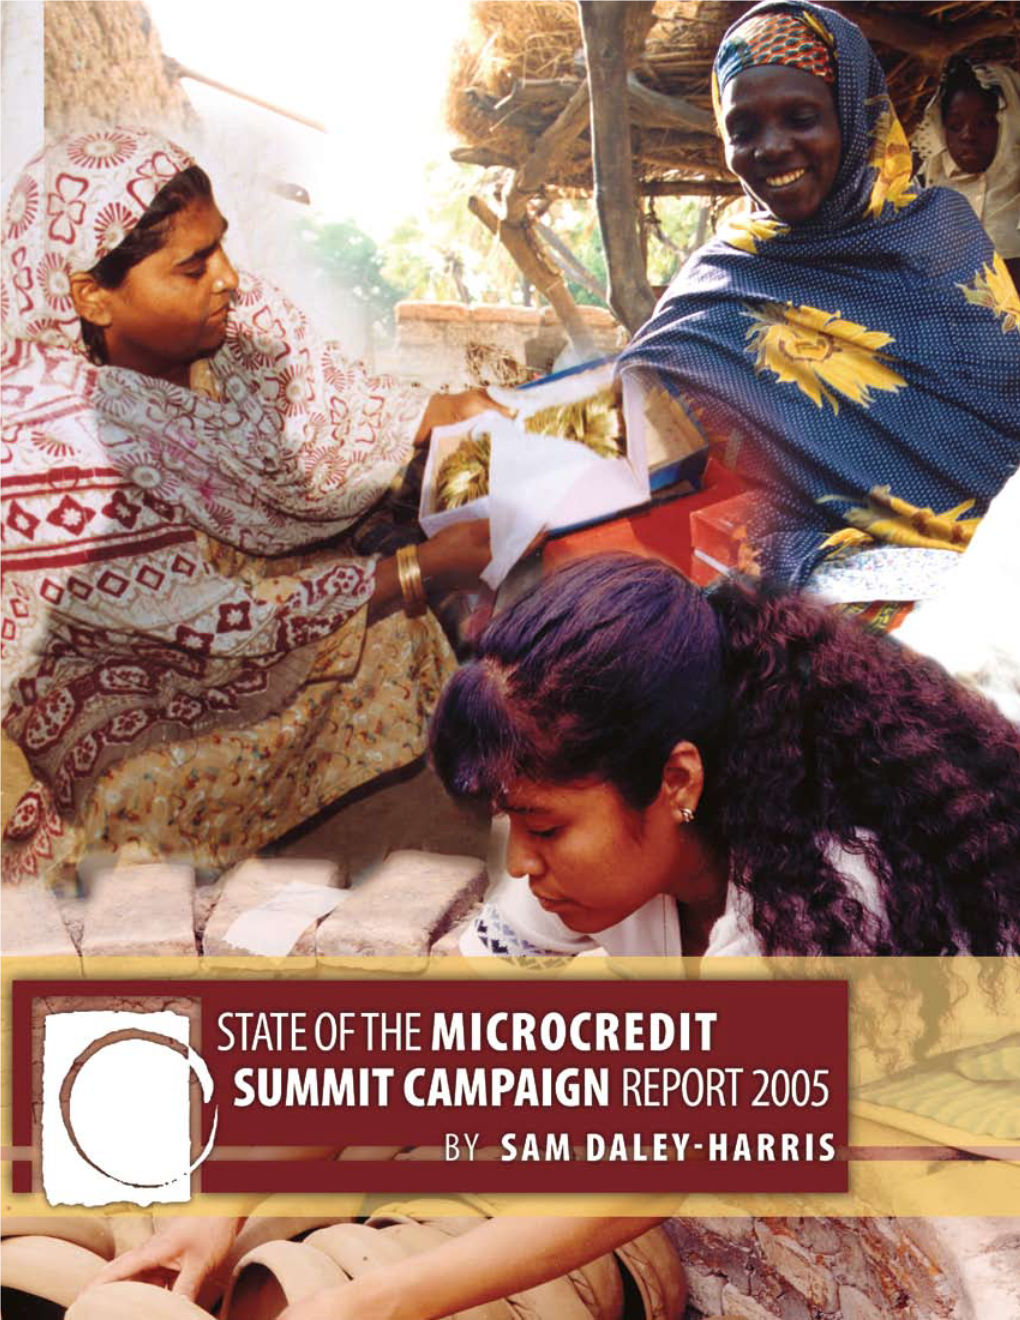 State of the Microcredit Summit Campaign Report 2005